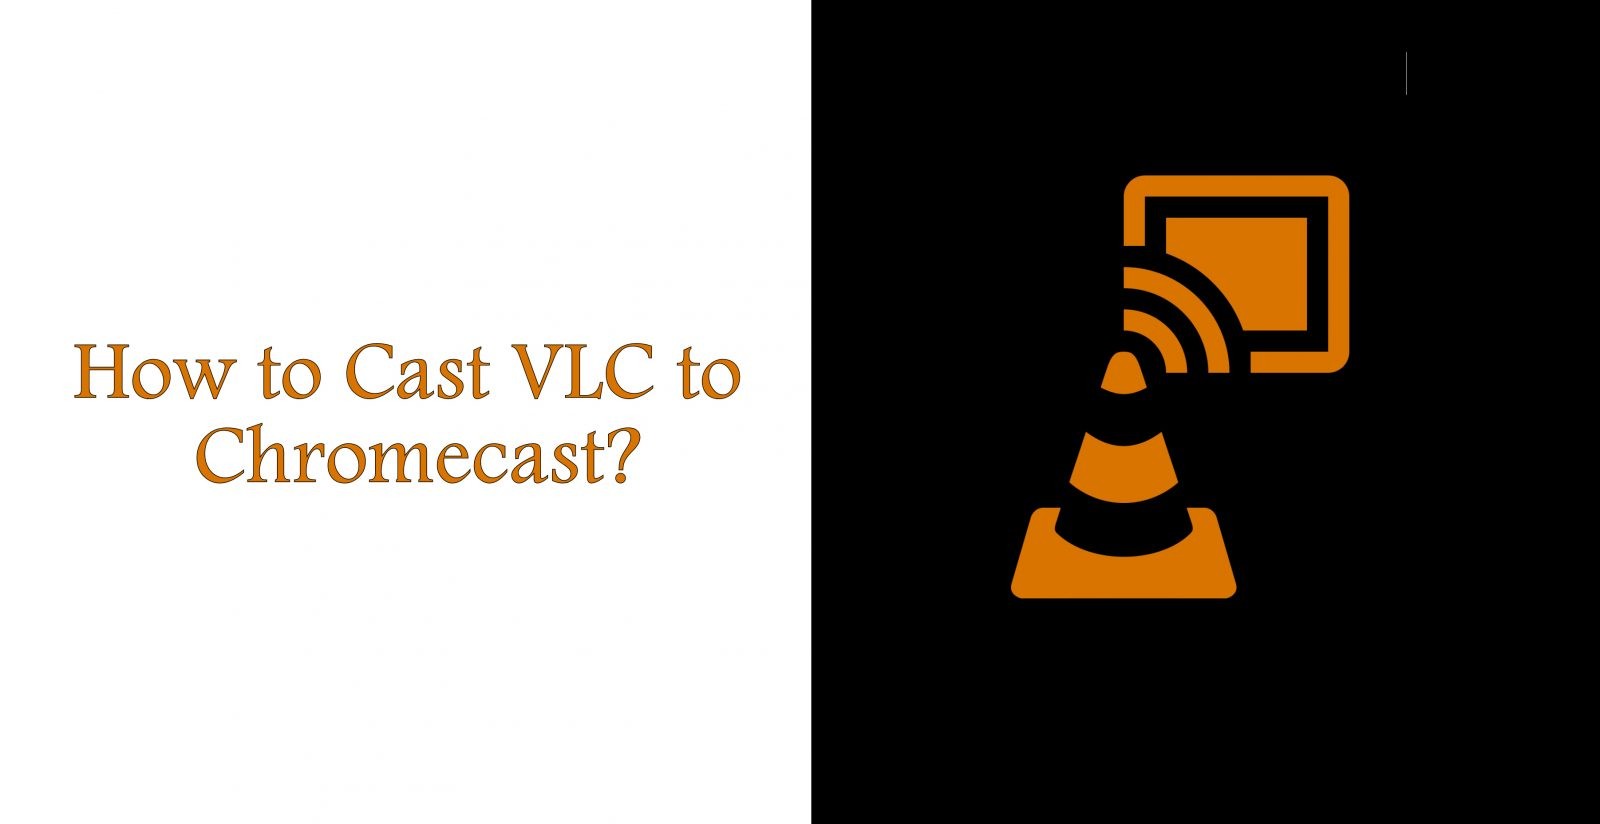 can you chromecast from vlc media player